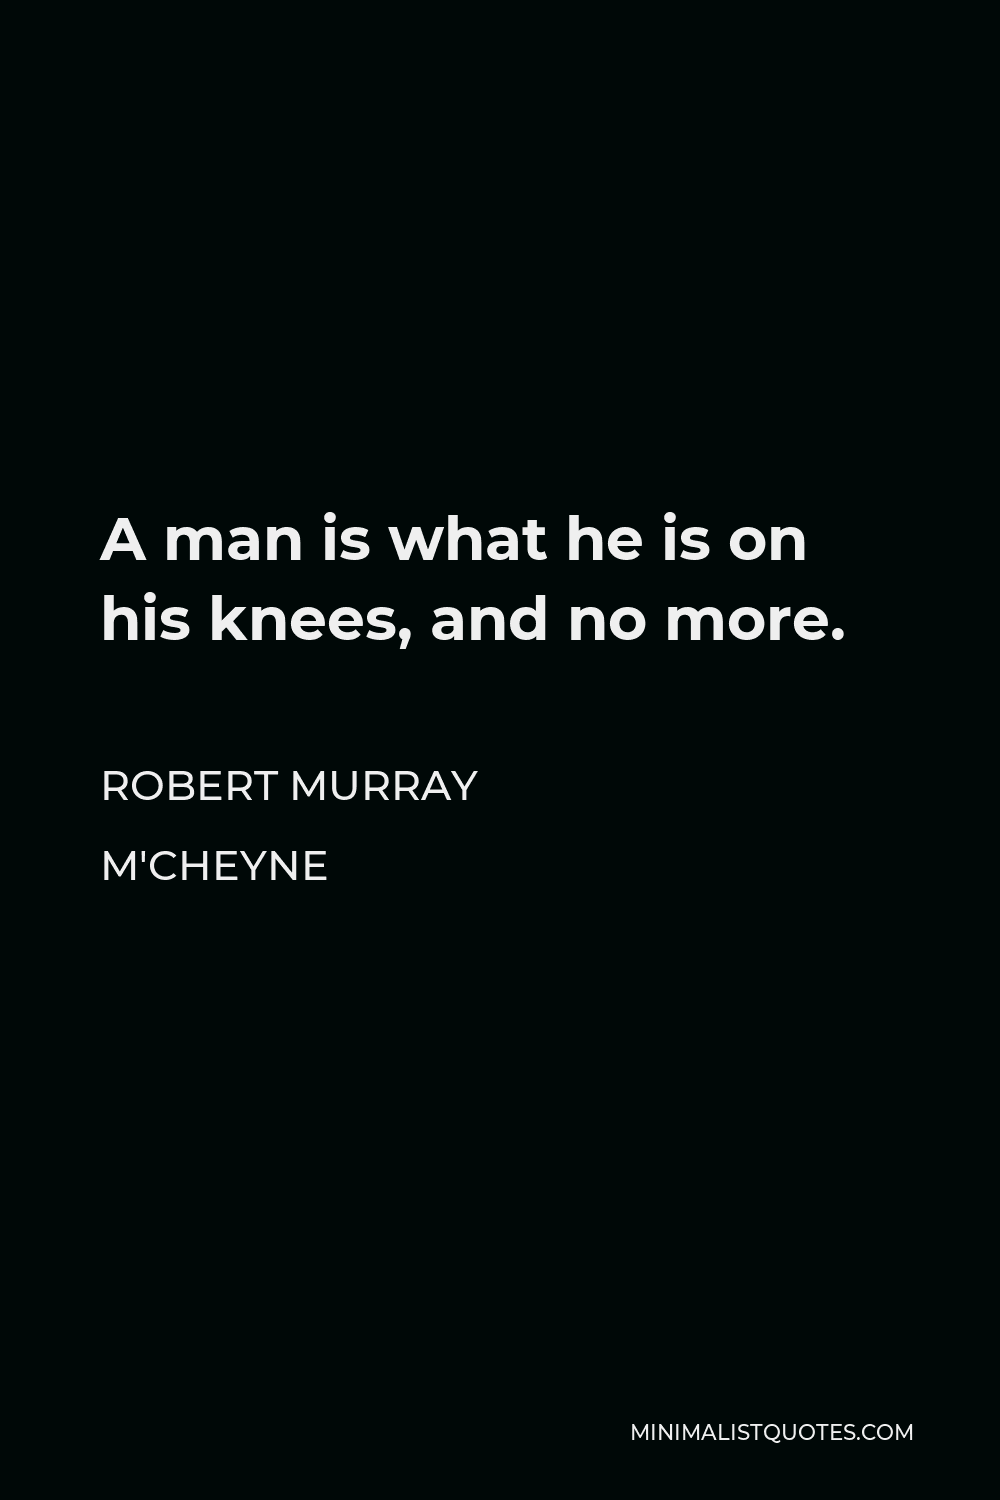 Robert Murray M'Cheyne Quote - A man is what he is on his knees, and no more.